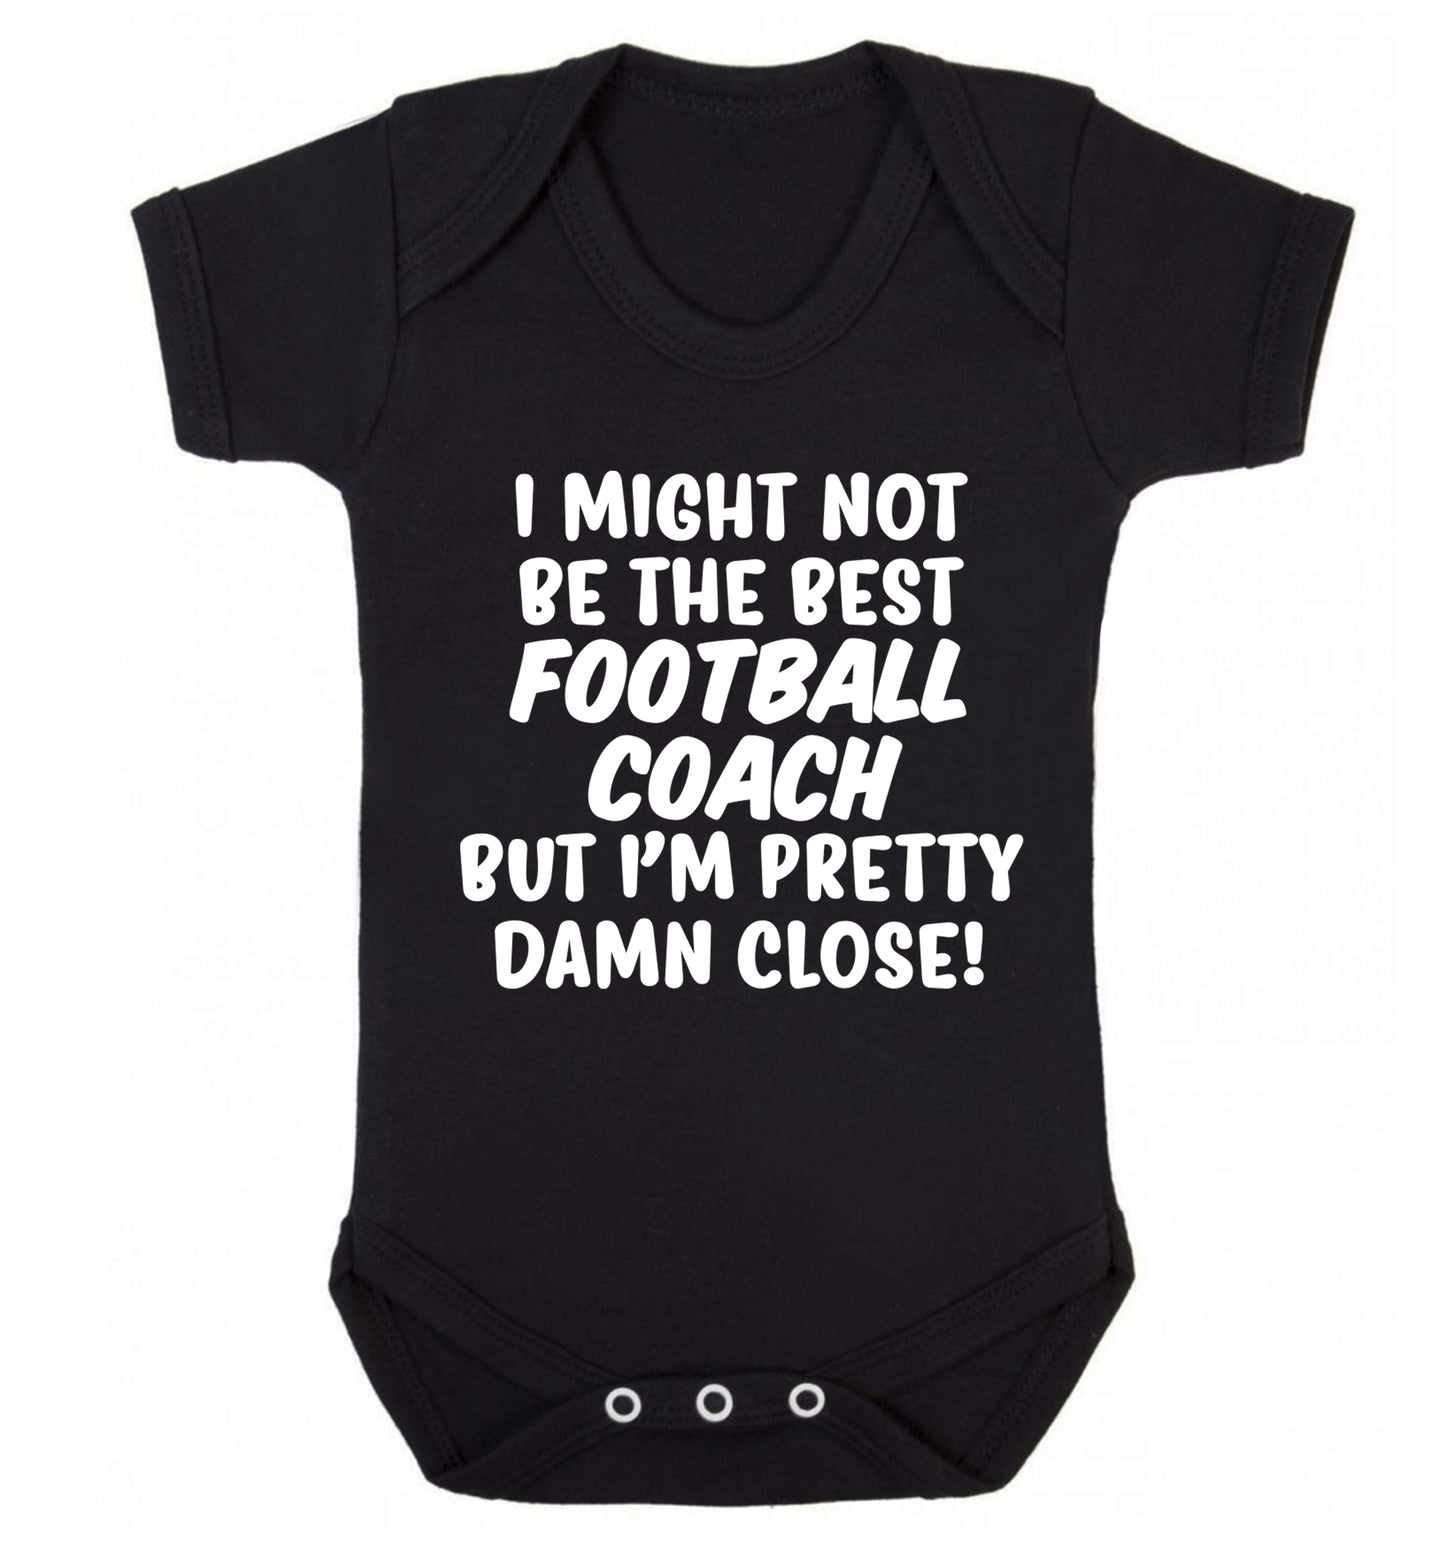 I might not be the best football coach but I'm pretty close! Baby Vest black 18-24 months